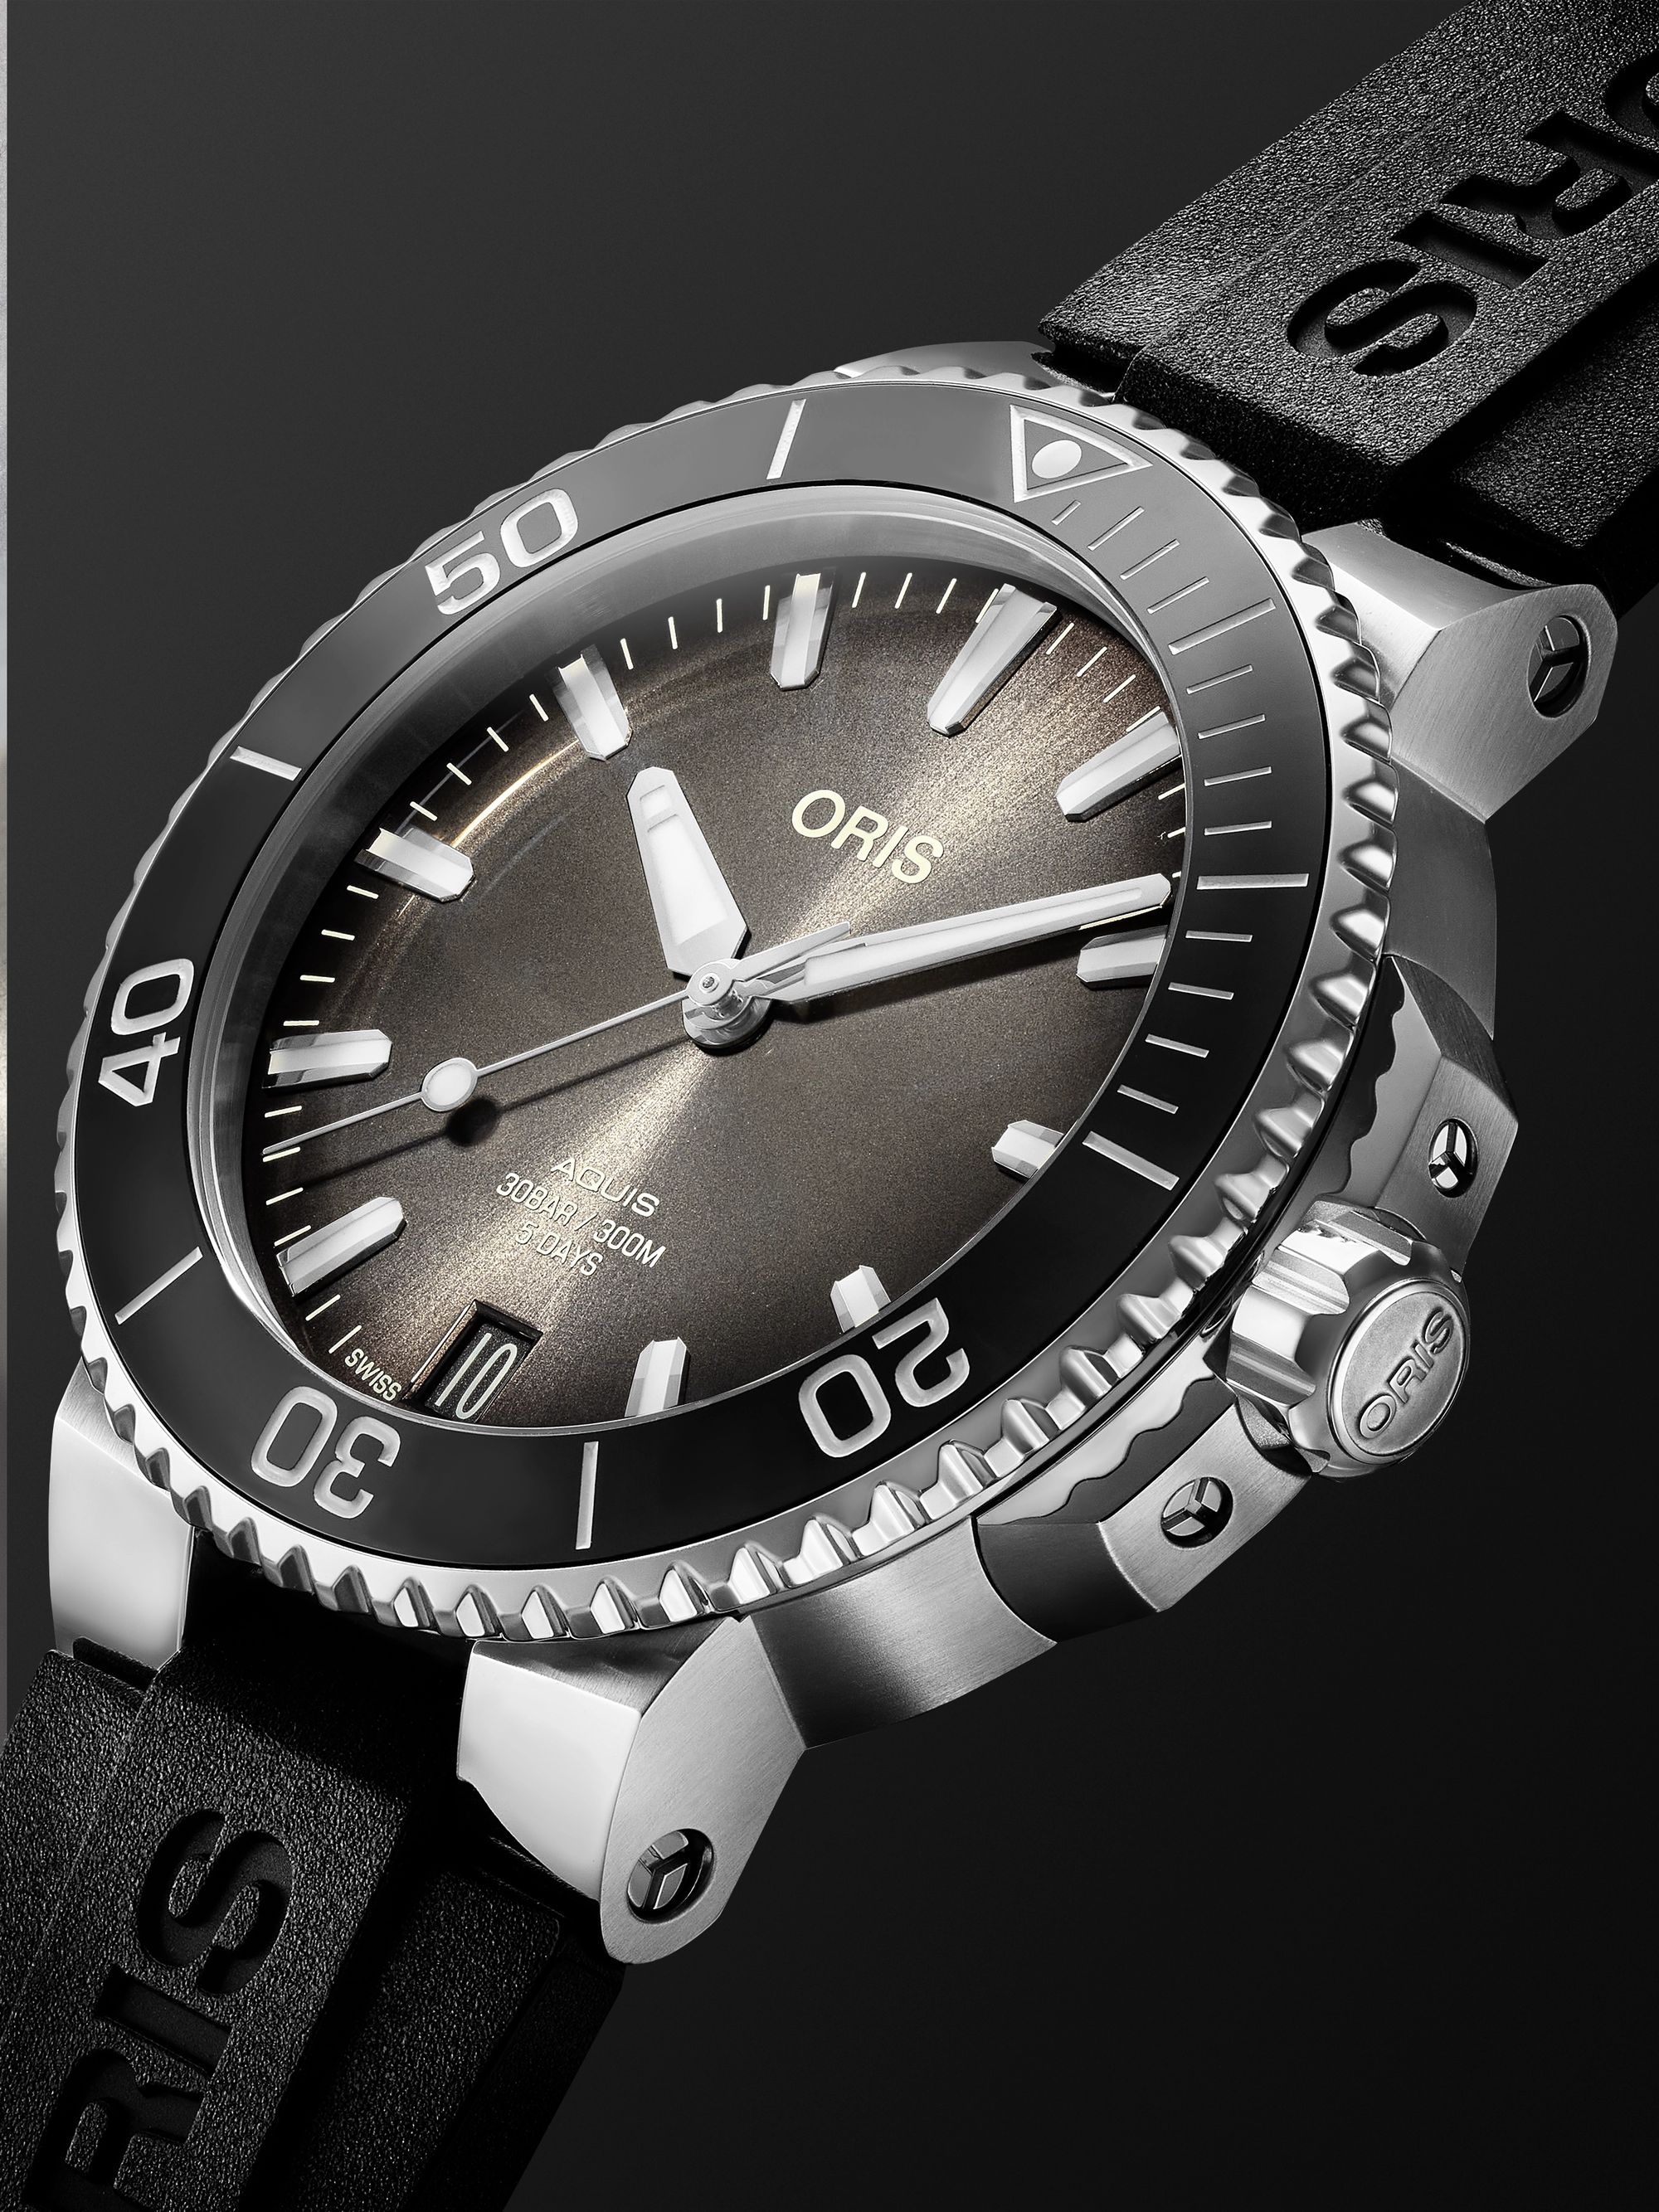 ORIS Aquis Date Automatic 41.5mm Stainless Steel and Rubber Watch, Ref. No. 01 400 7769 4154-07 4 22 74FC